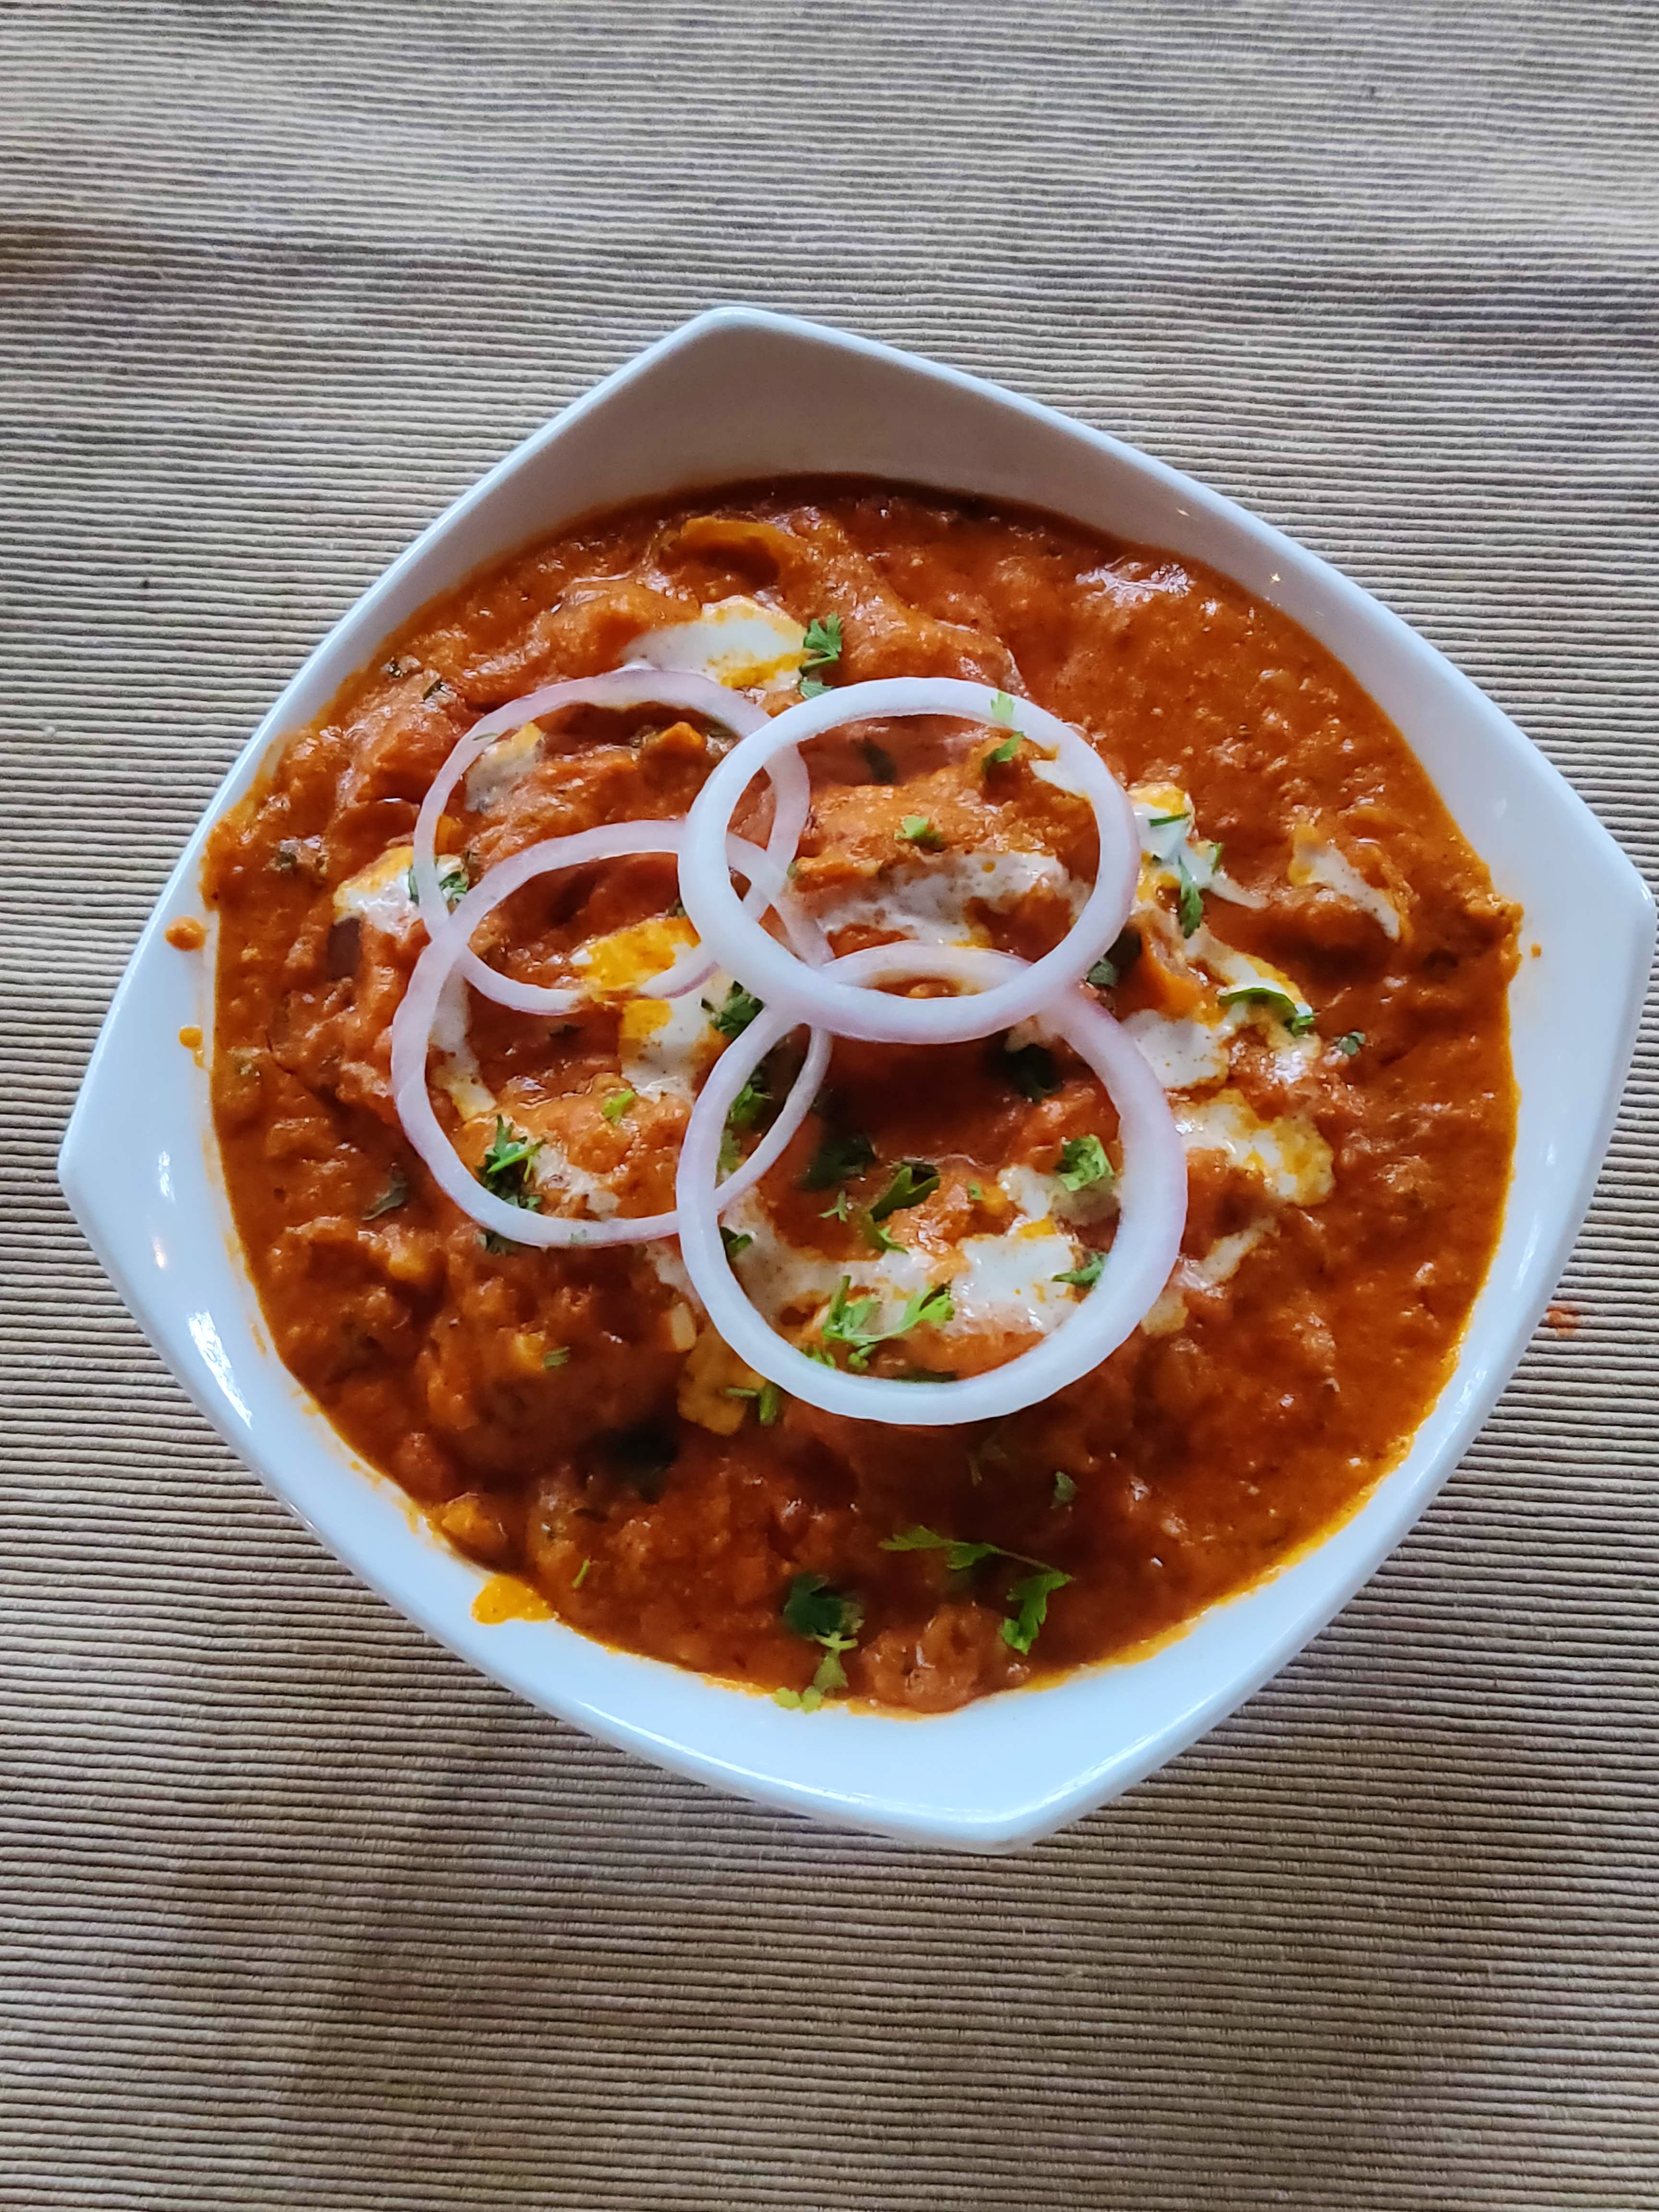 Dish,Food,Cuisine,Ingredient,Curry,Indian cuisine,Produce,Gravy,Recipe,Dal makhani